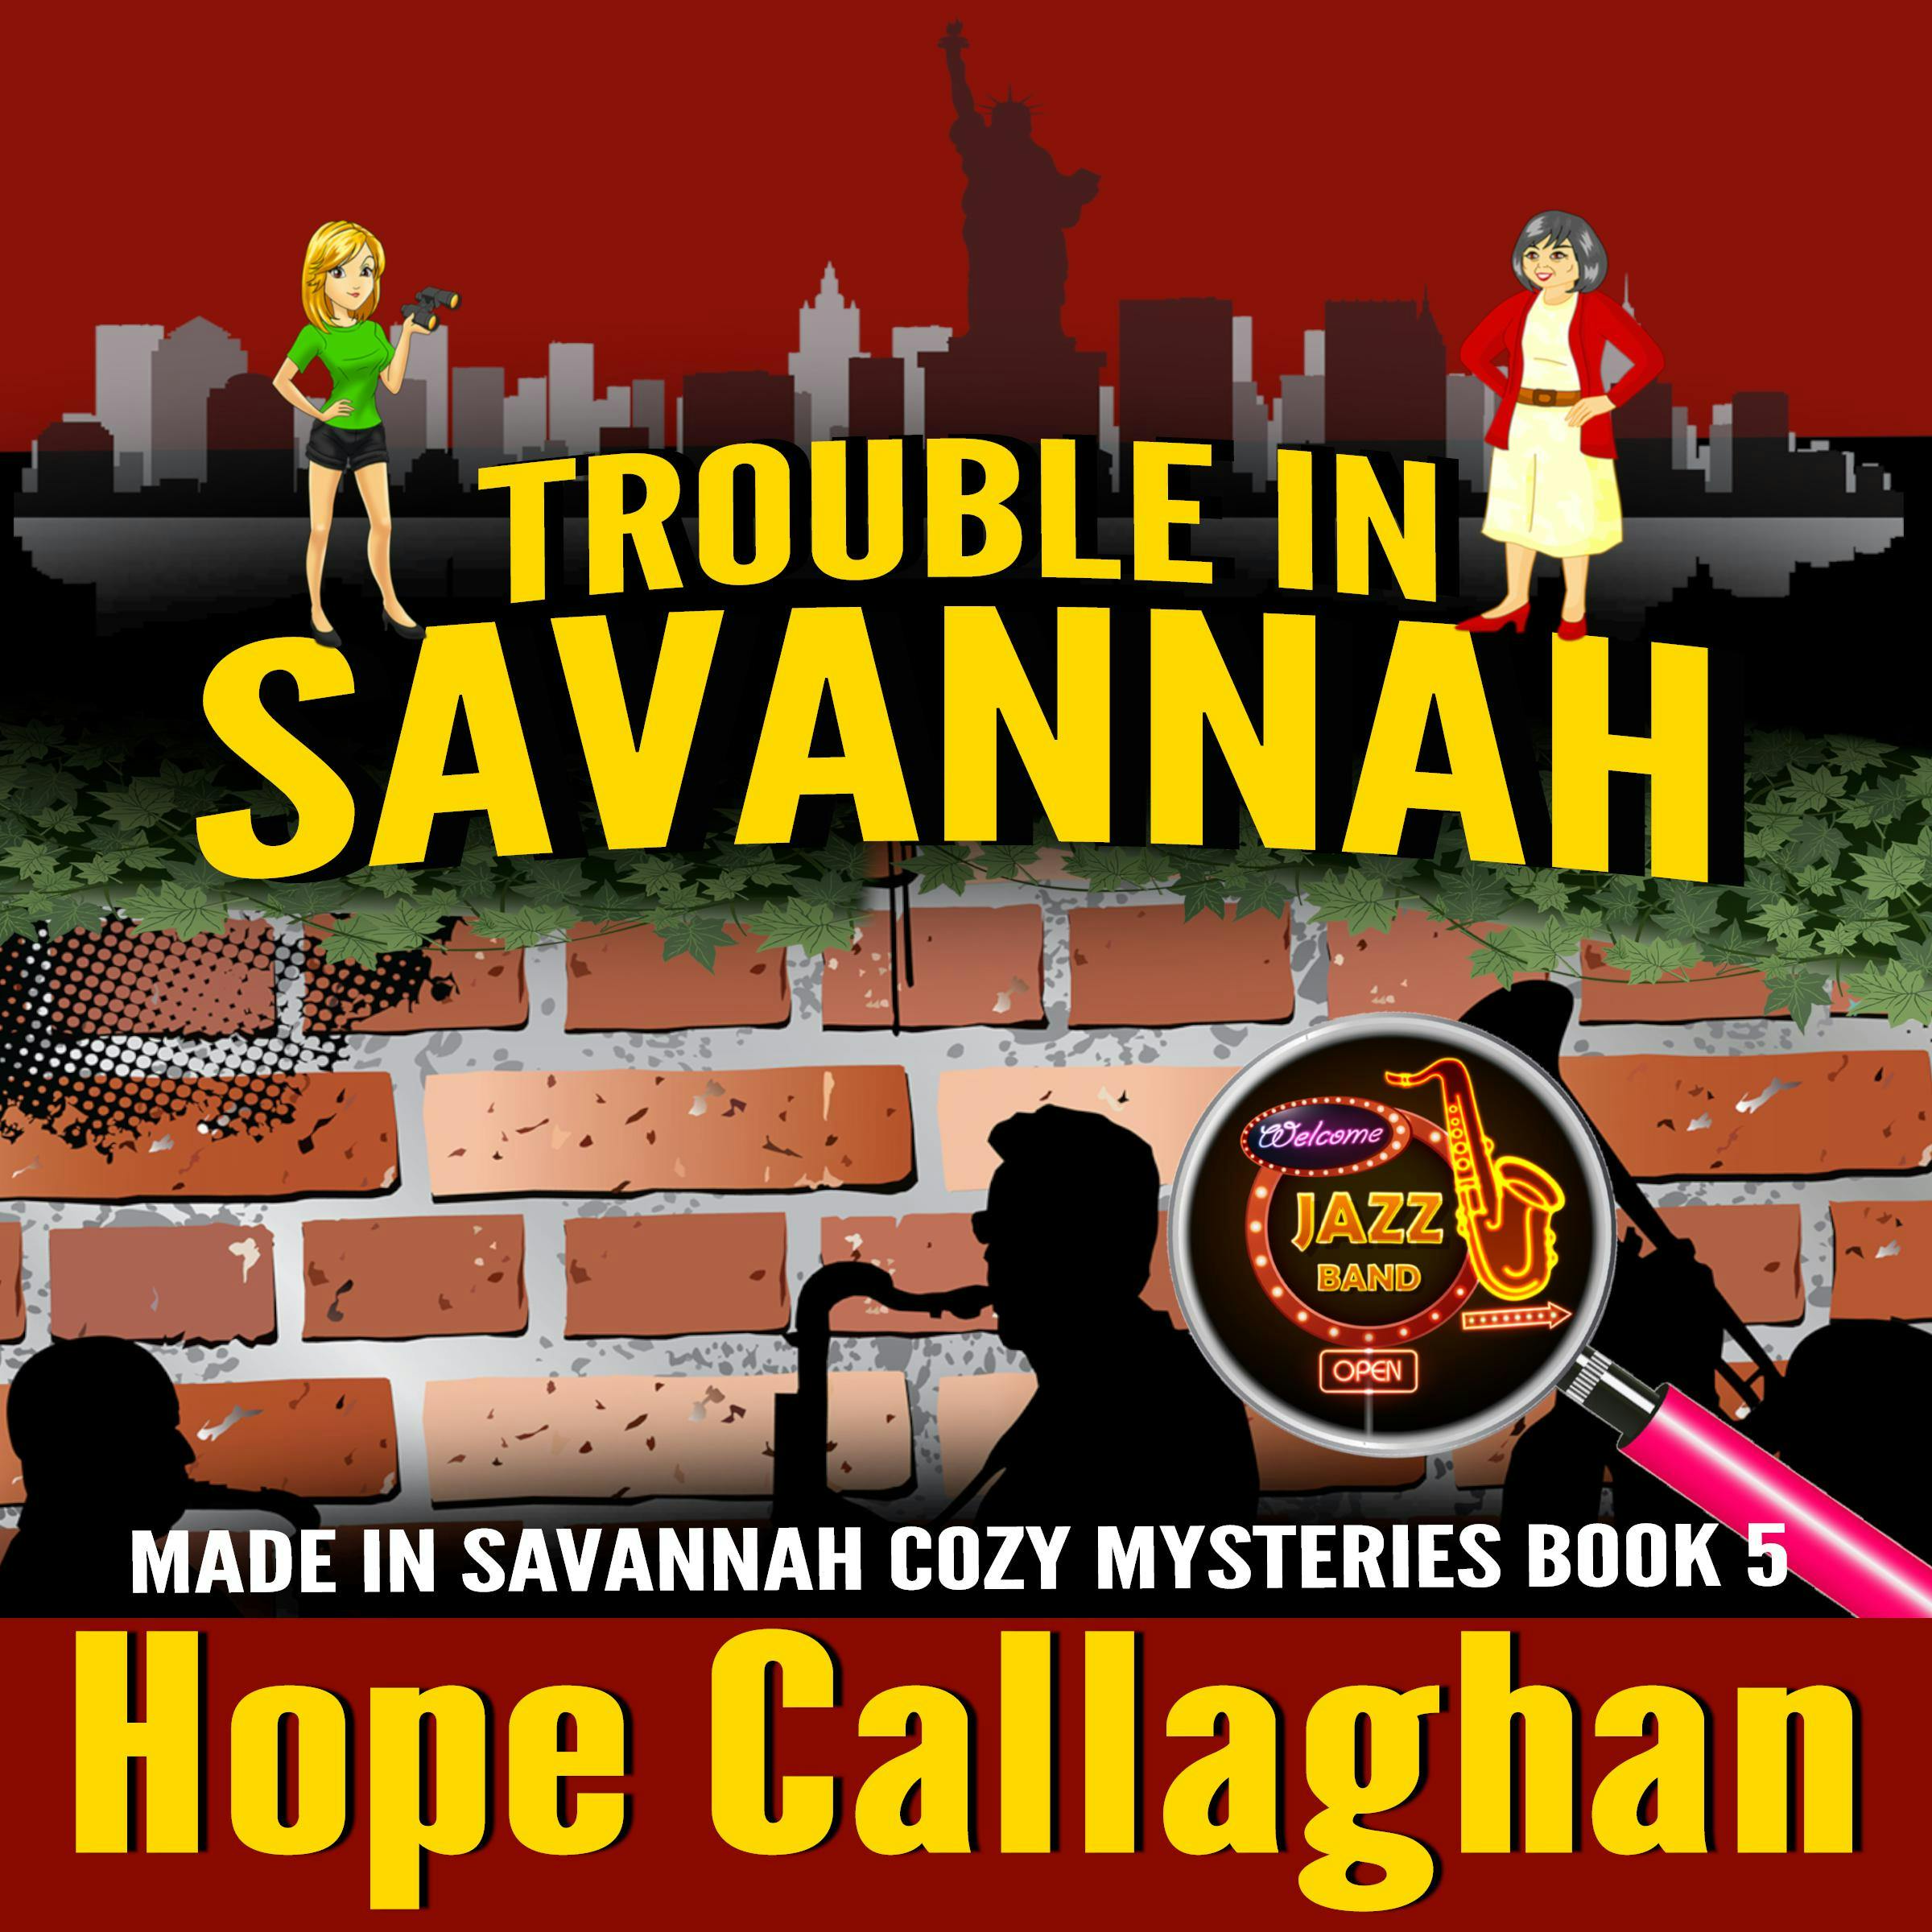 Trouble in Savannah: A Made in Savannah Mystery Audiobook - undefined